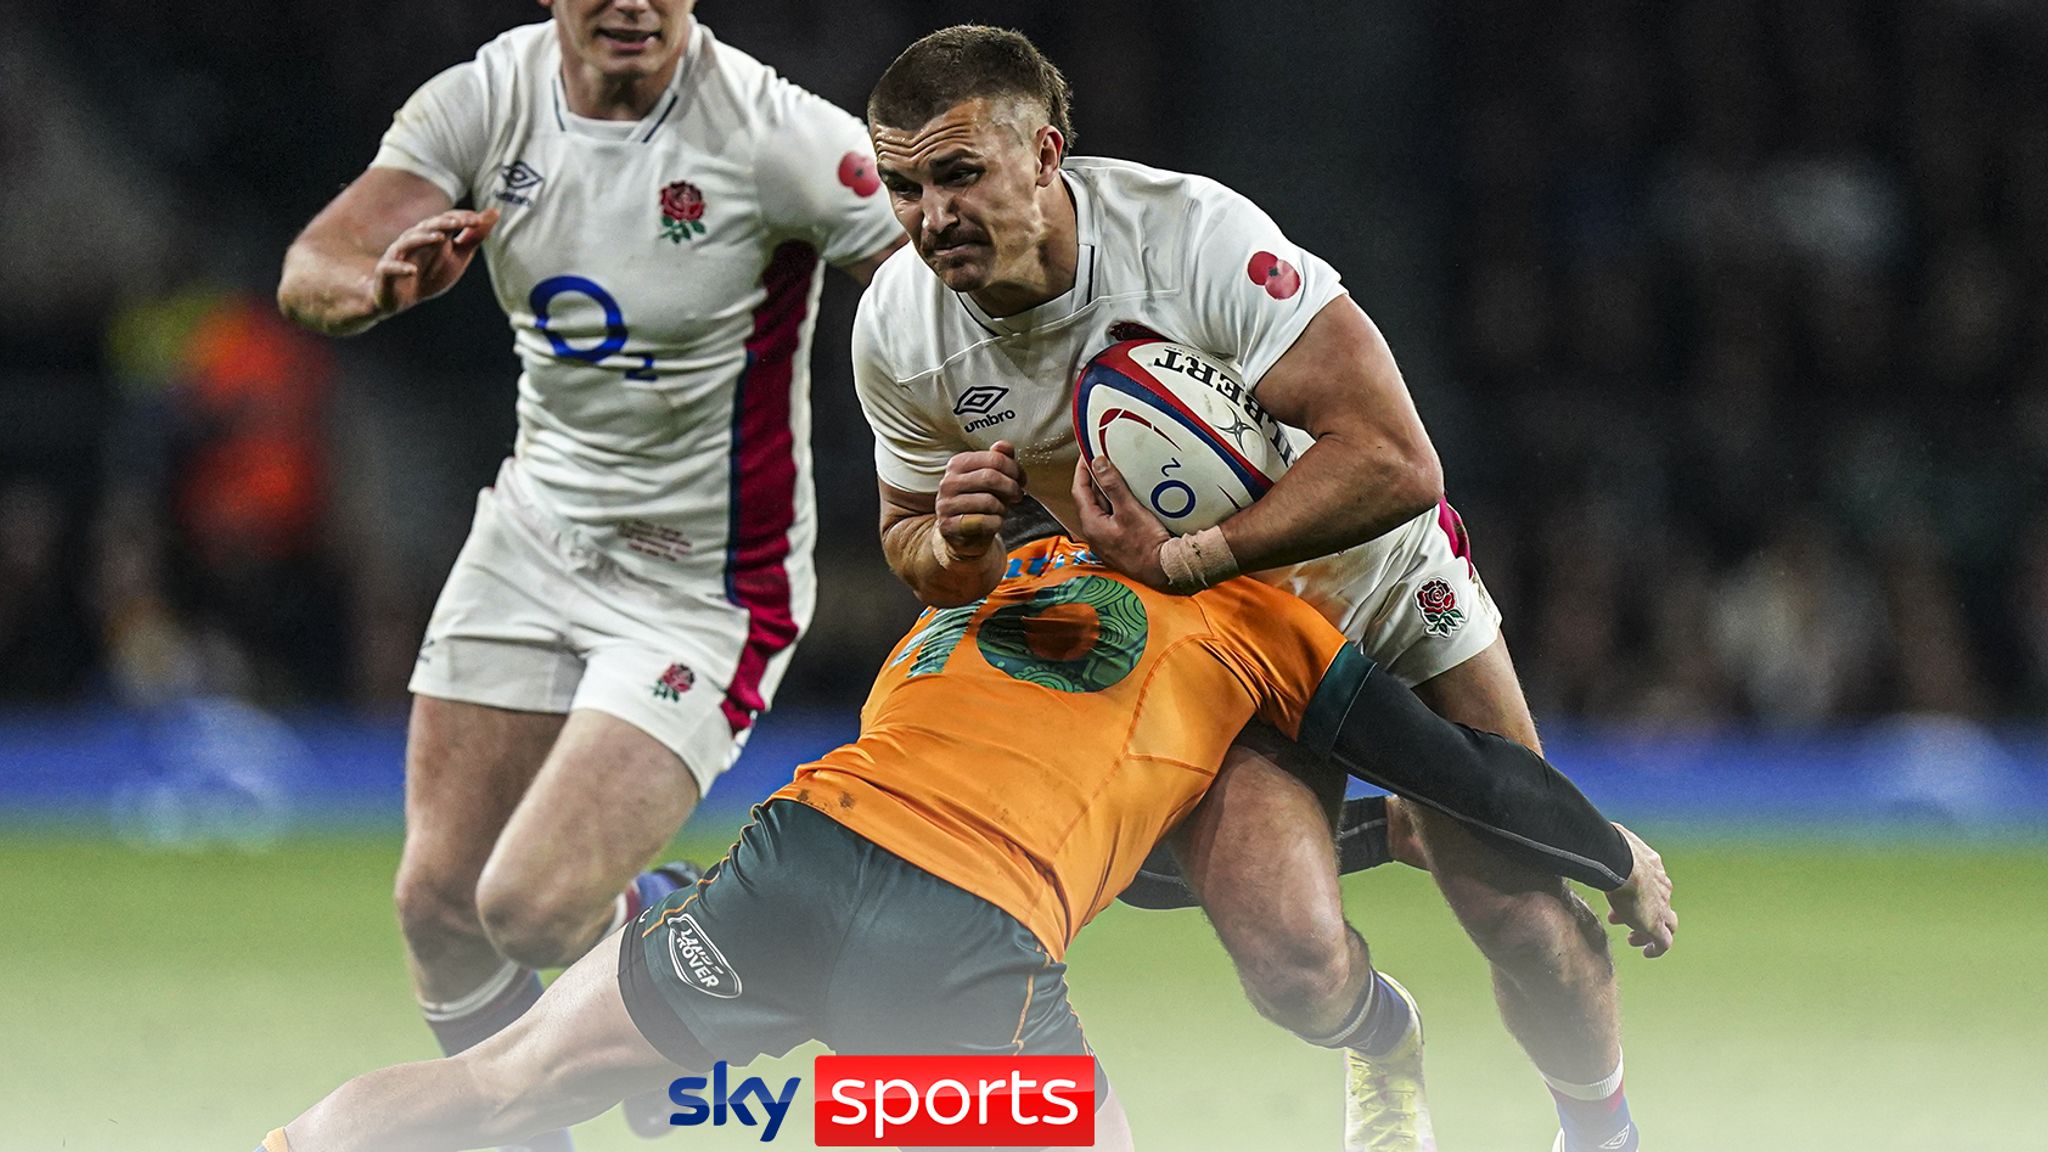 Home Nations July tours, Rugby Championship, Super Rugby live on Sky Sports until 2025 in SANZAAR deal Rugby Union News Sky Sports